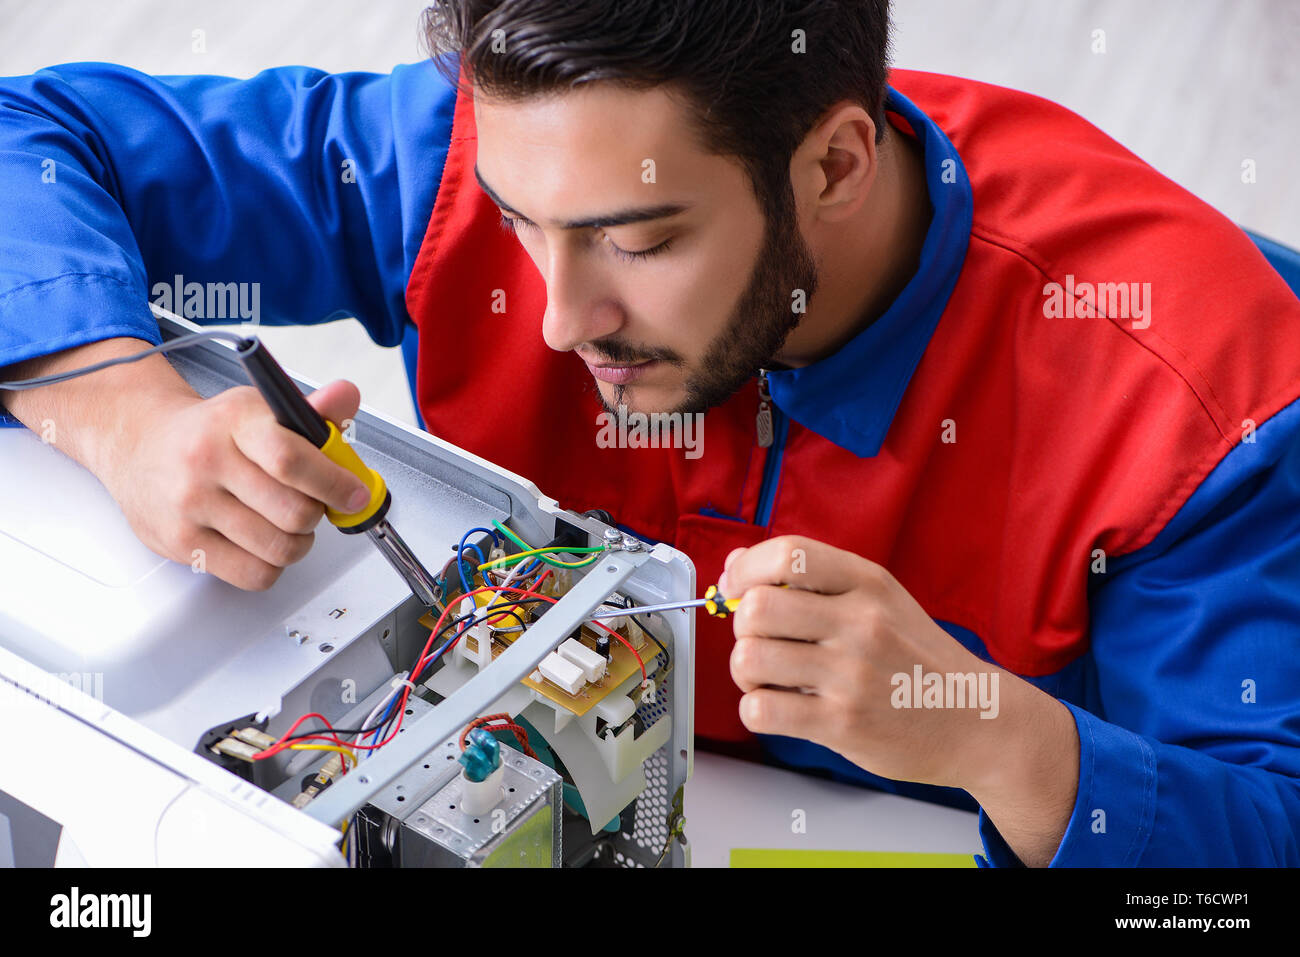 Young repairman fixing and repairing microwave oven Stock Photo